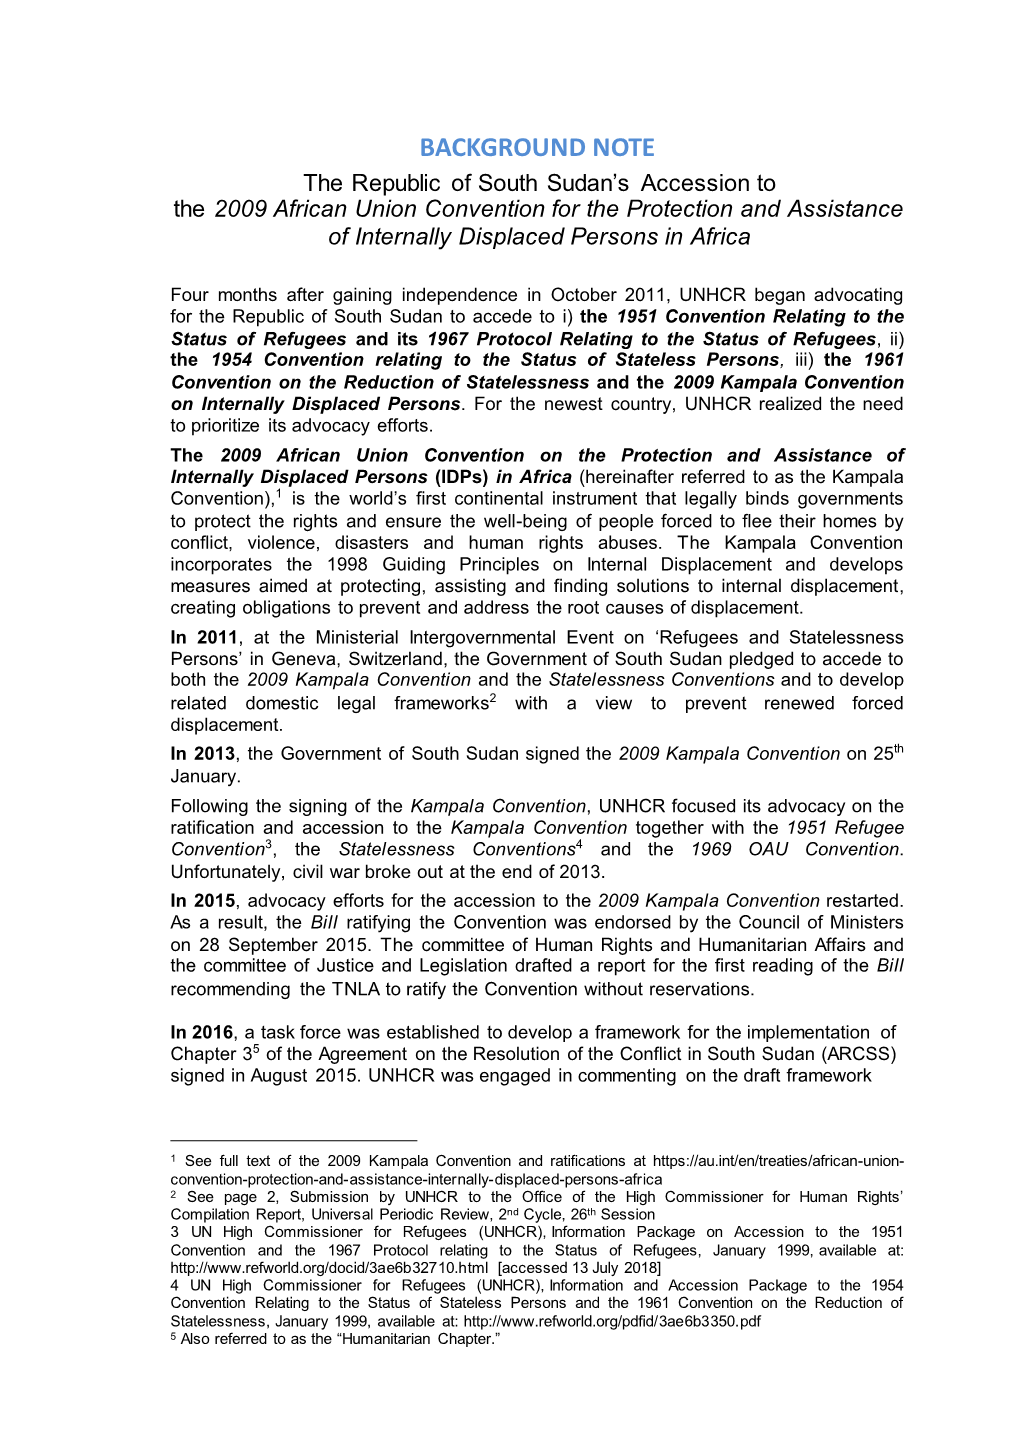 The Republic of South Sudan's Accession to the 2009 African Union Convention for the Protection and Assistance of Internally Displaced Persons in Africa